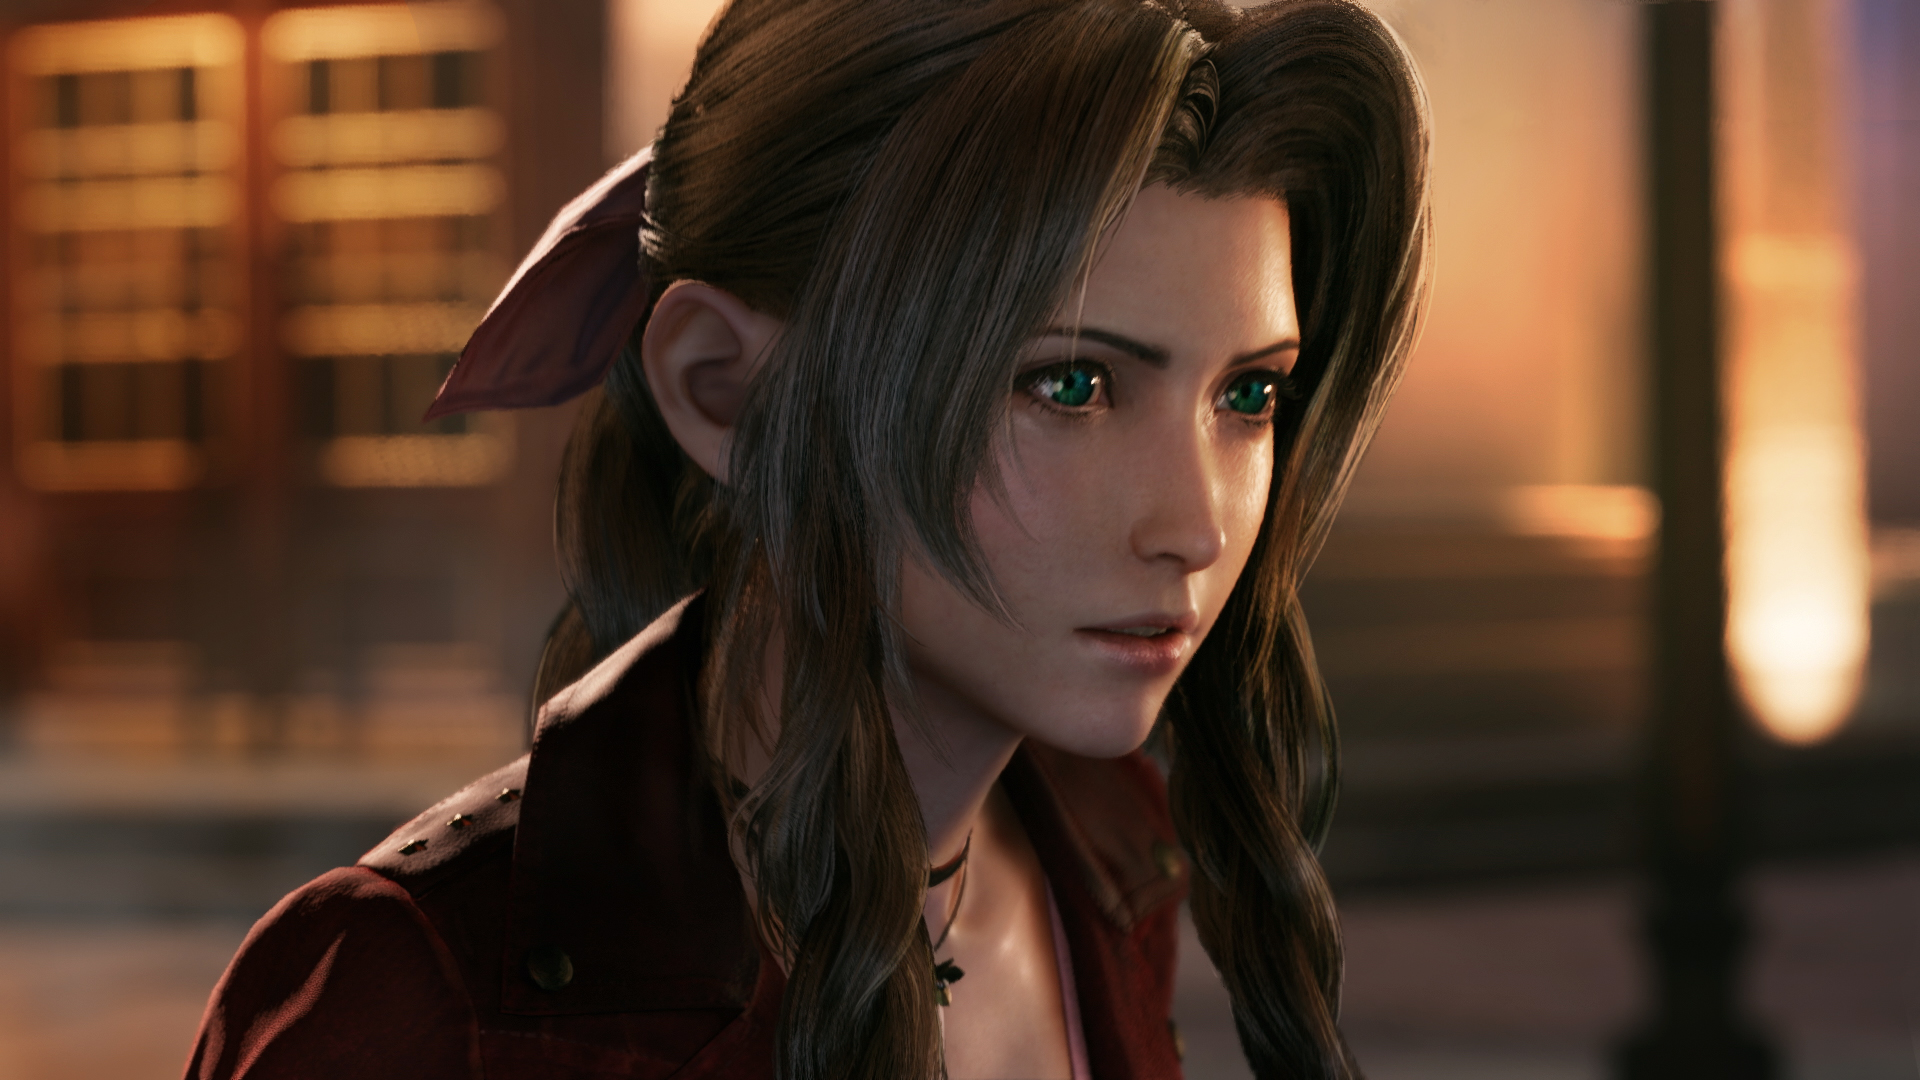 Final Fantasy VII Remake Releasing on PC Via Epic Games Store?